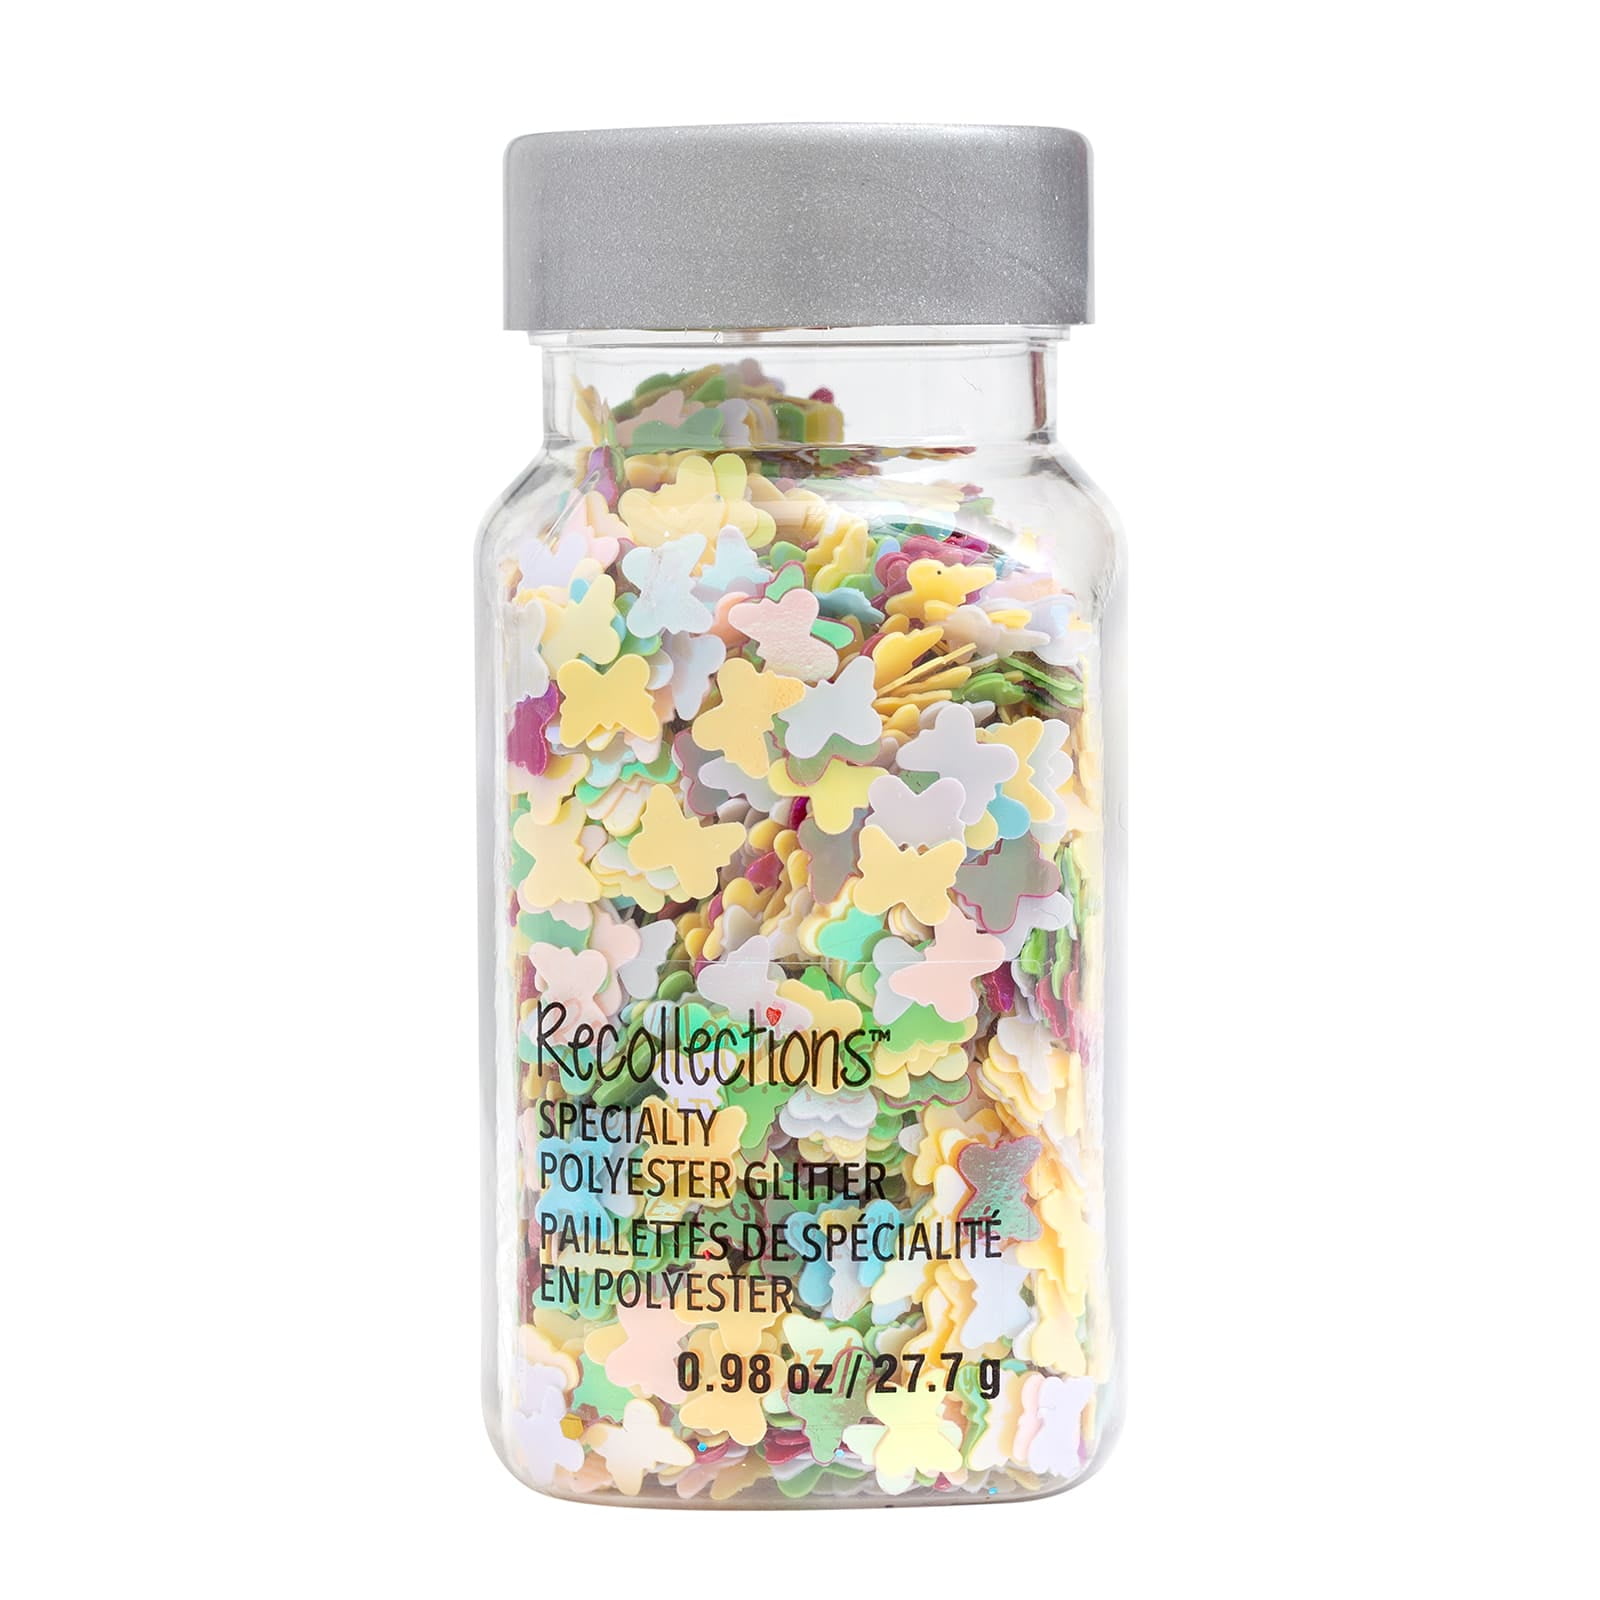 Glue Containing Glitter in 26 Rainbow Colors for Arts and Crafts